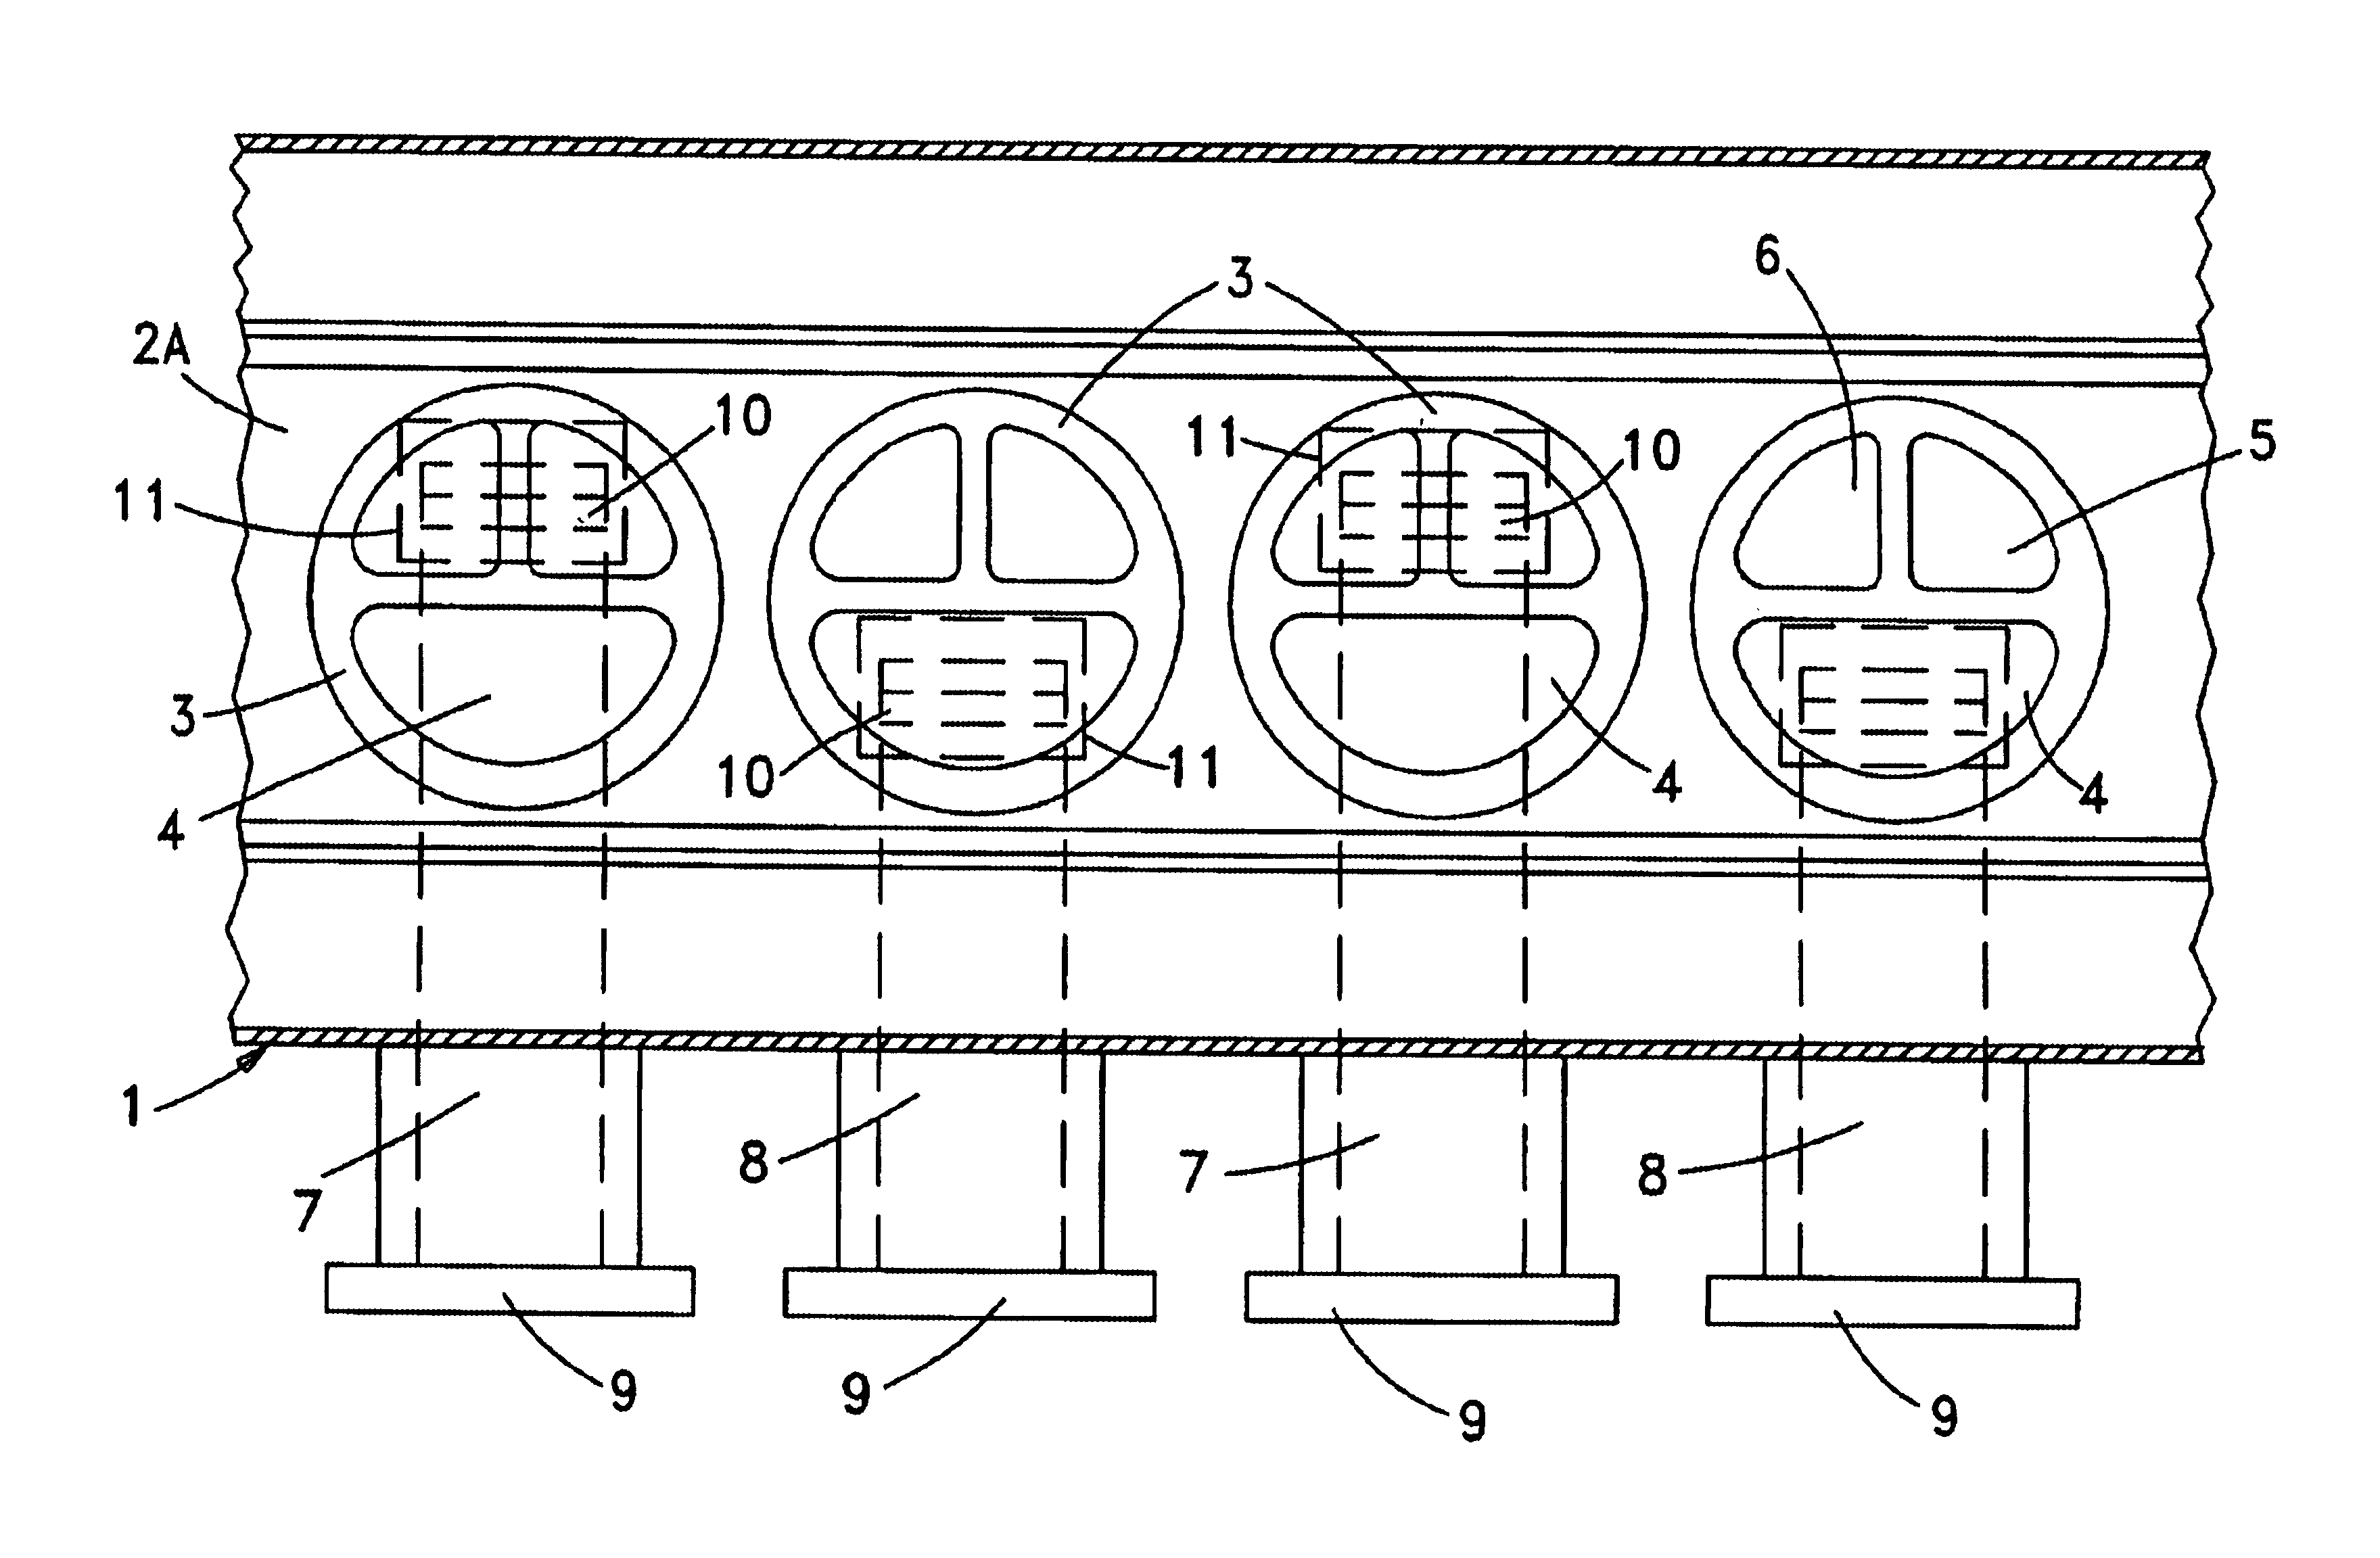 Method and device for microwave-heating prepared meals sealed in trays